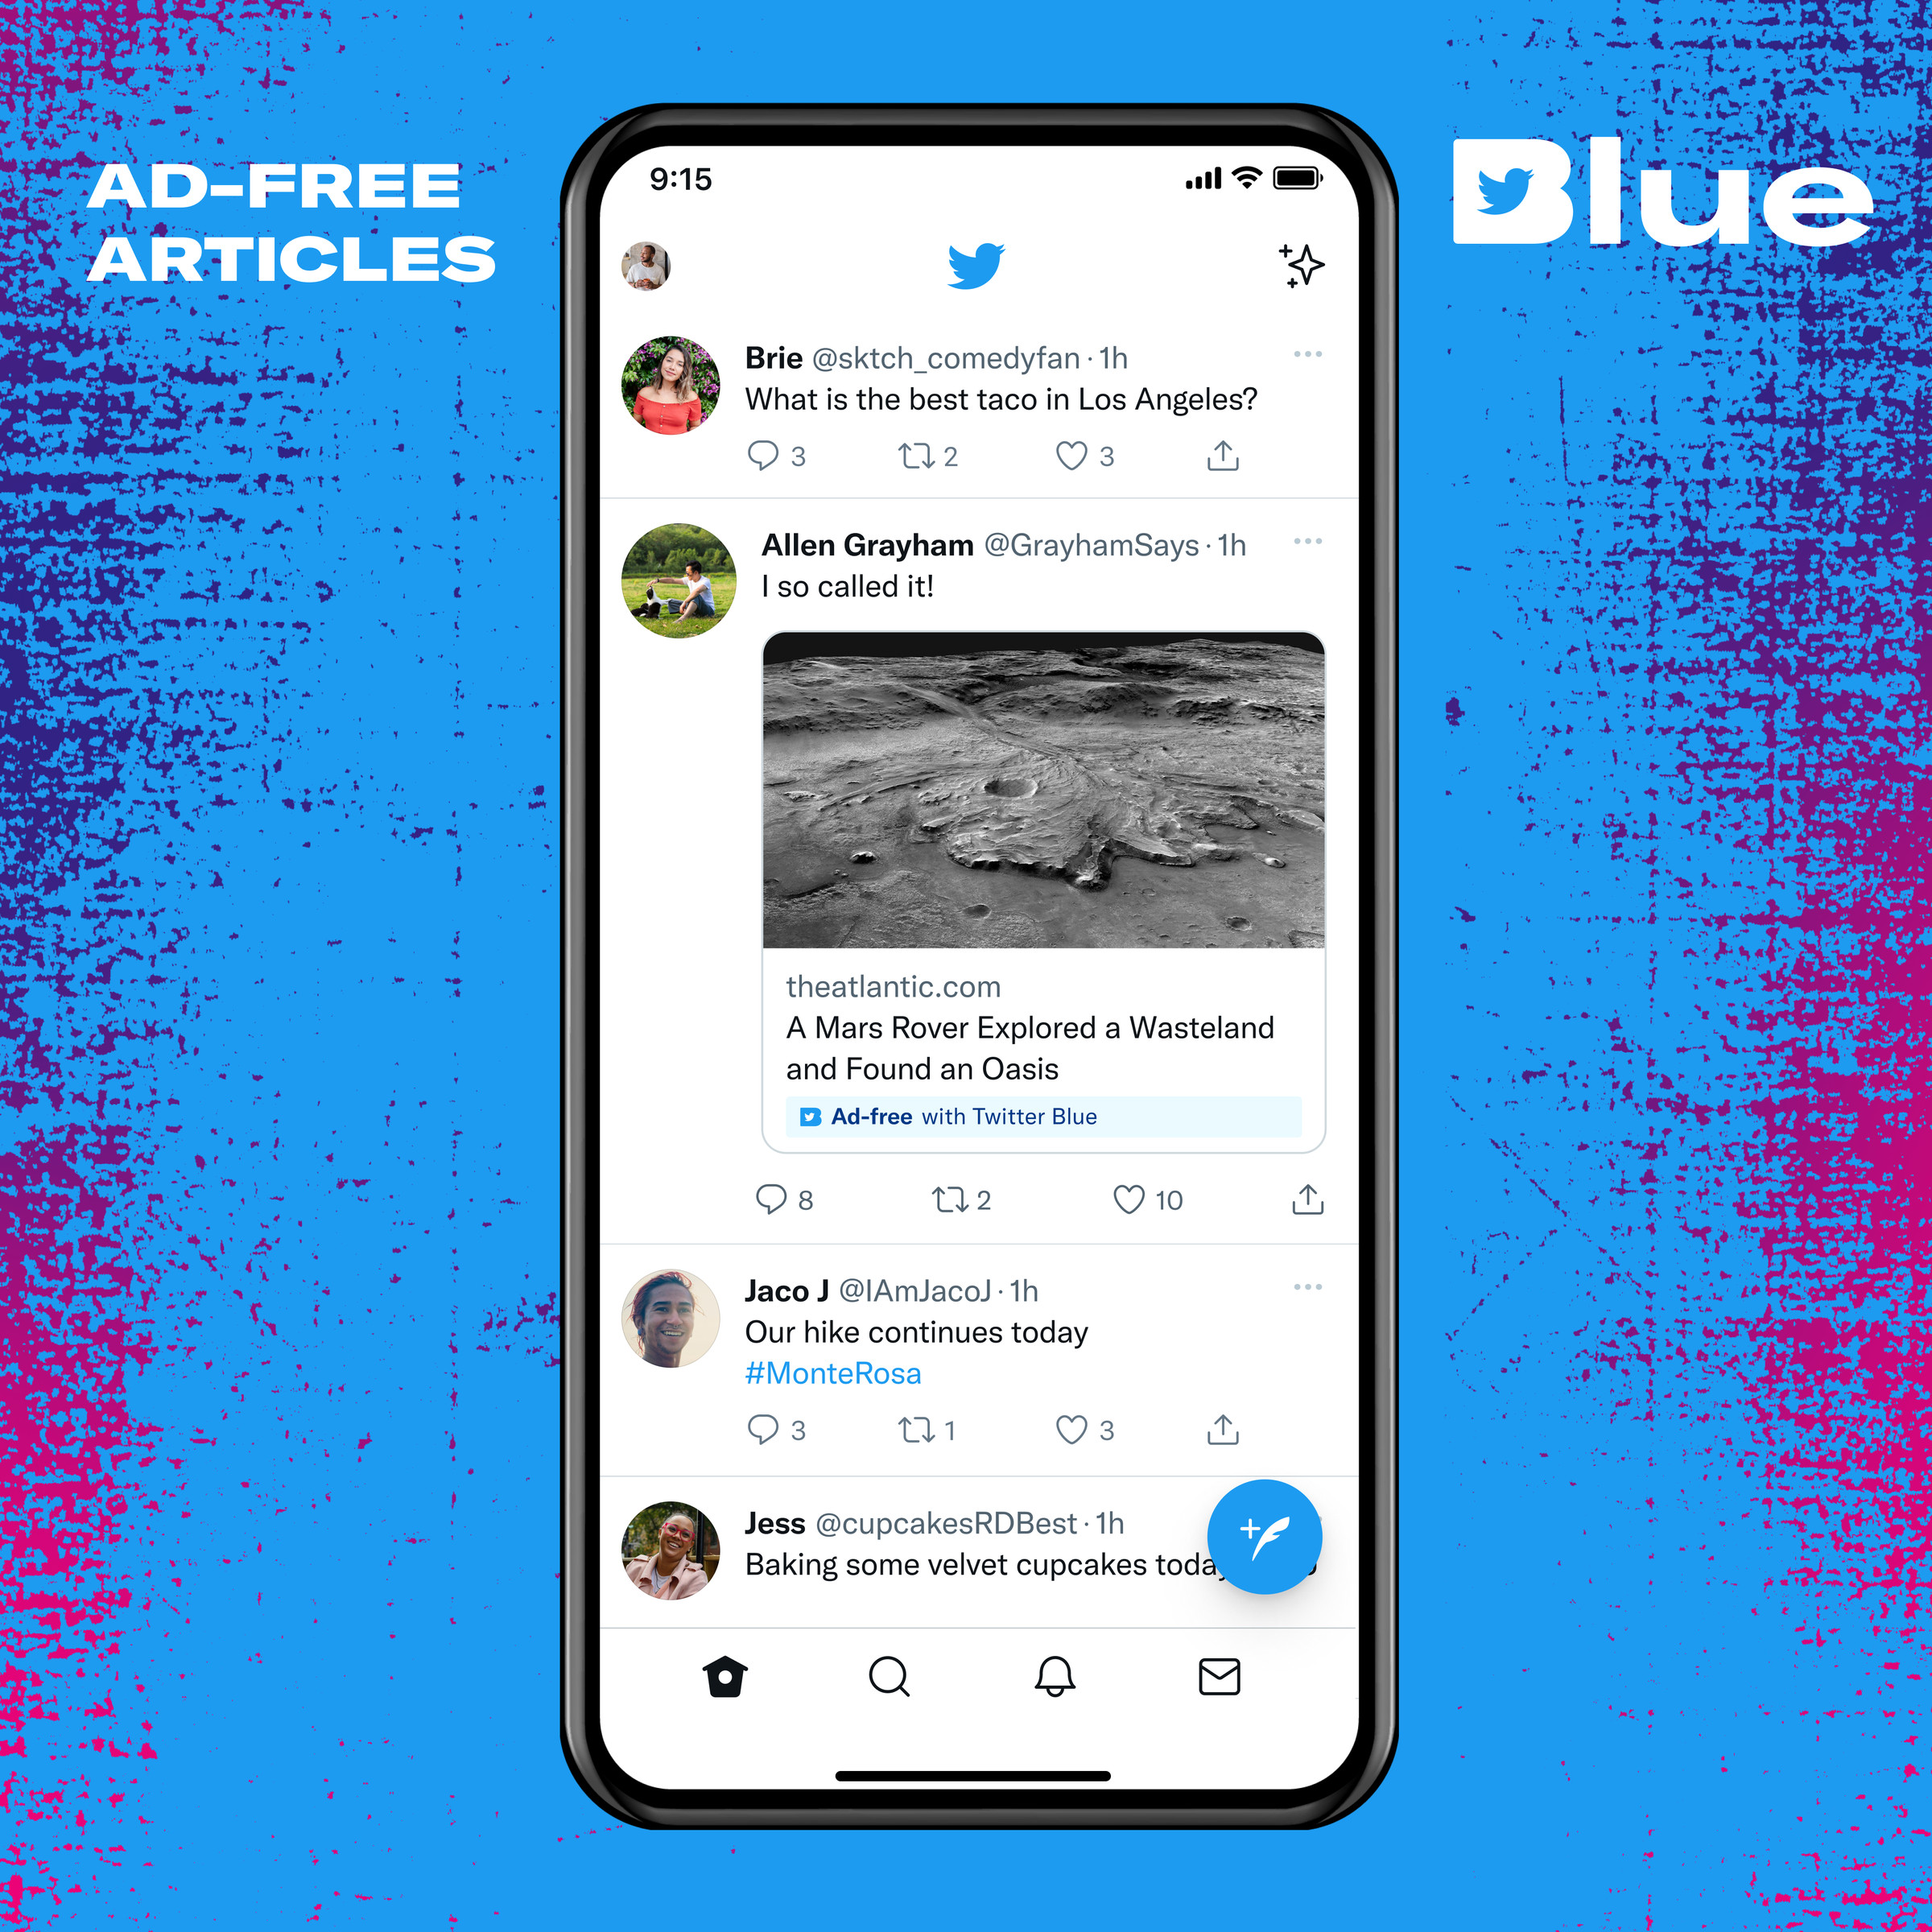 Here’s the label Twitter Blue subscribers will see for an ad-free article.